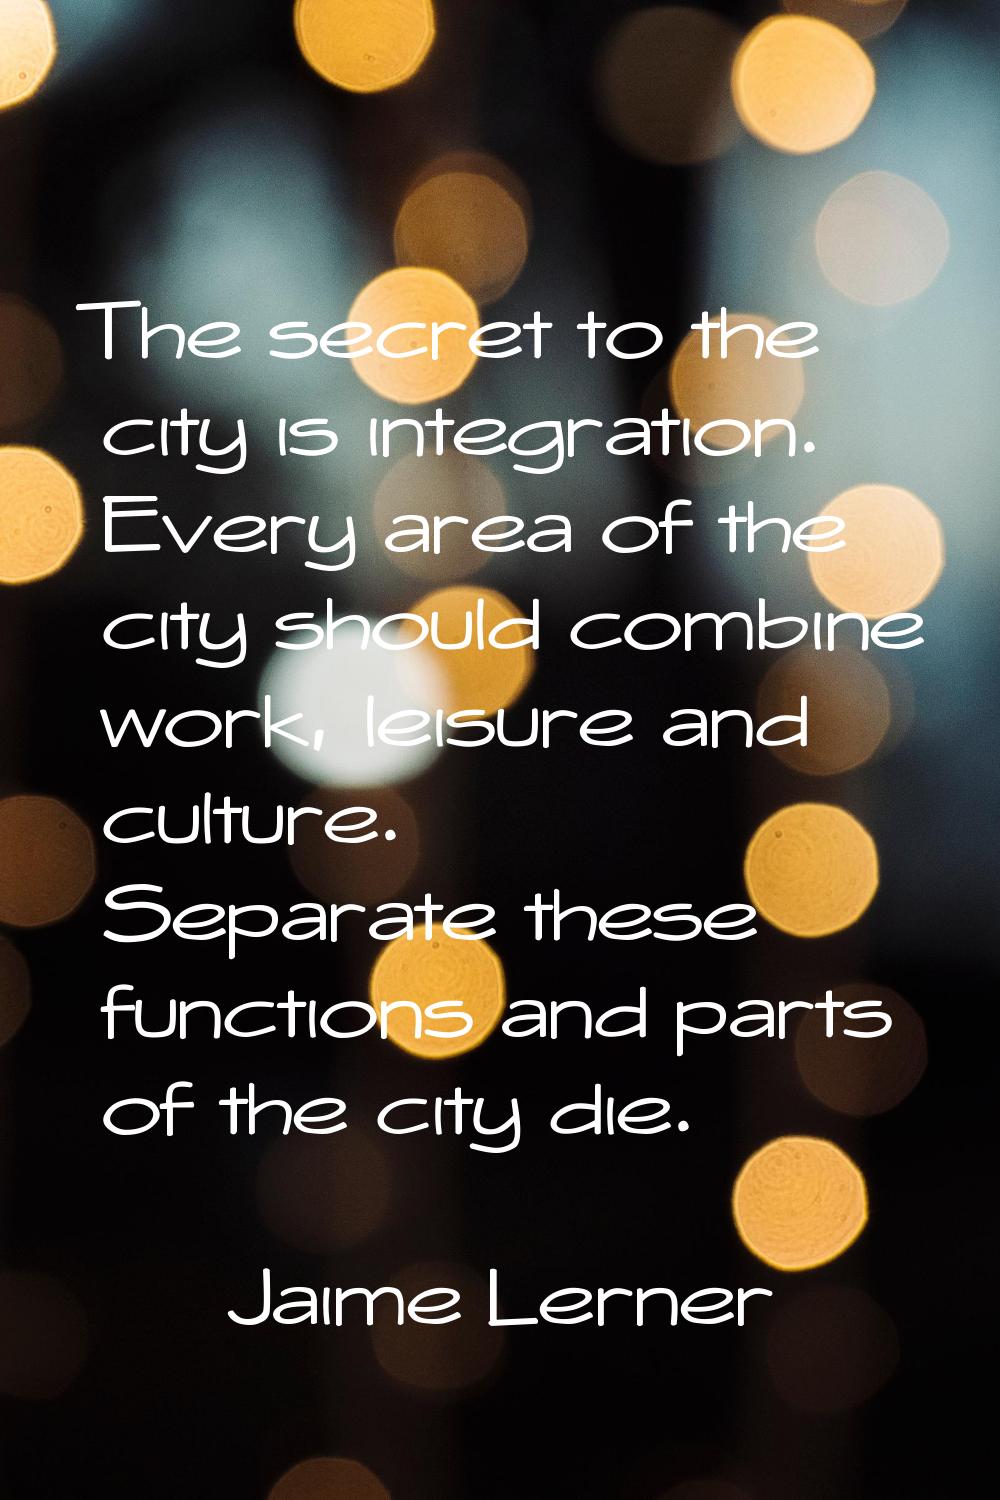 The secret to the city is integration. Every area of the city should combine work, leisure and cult